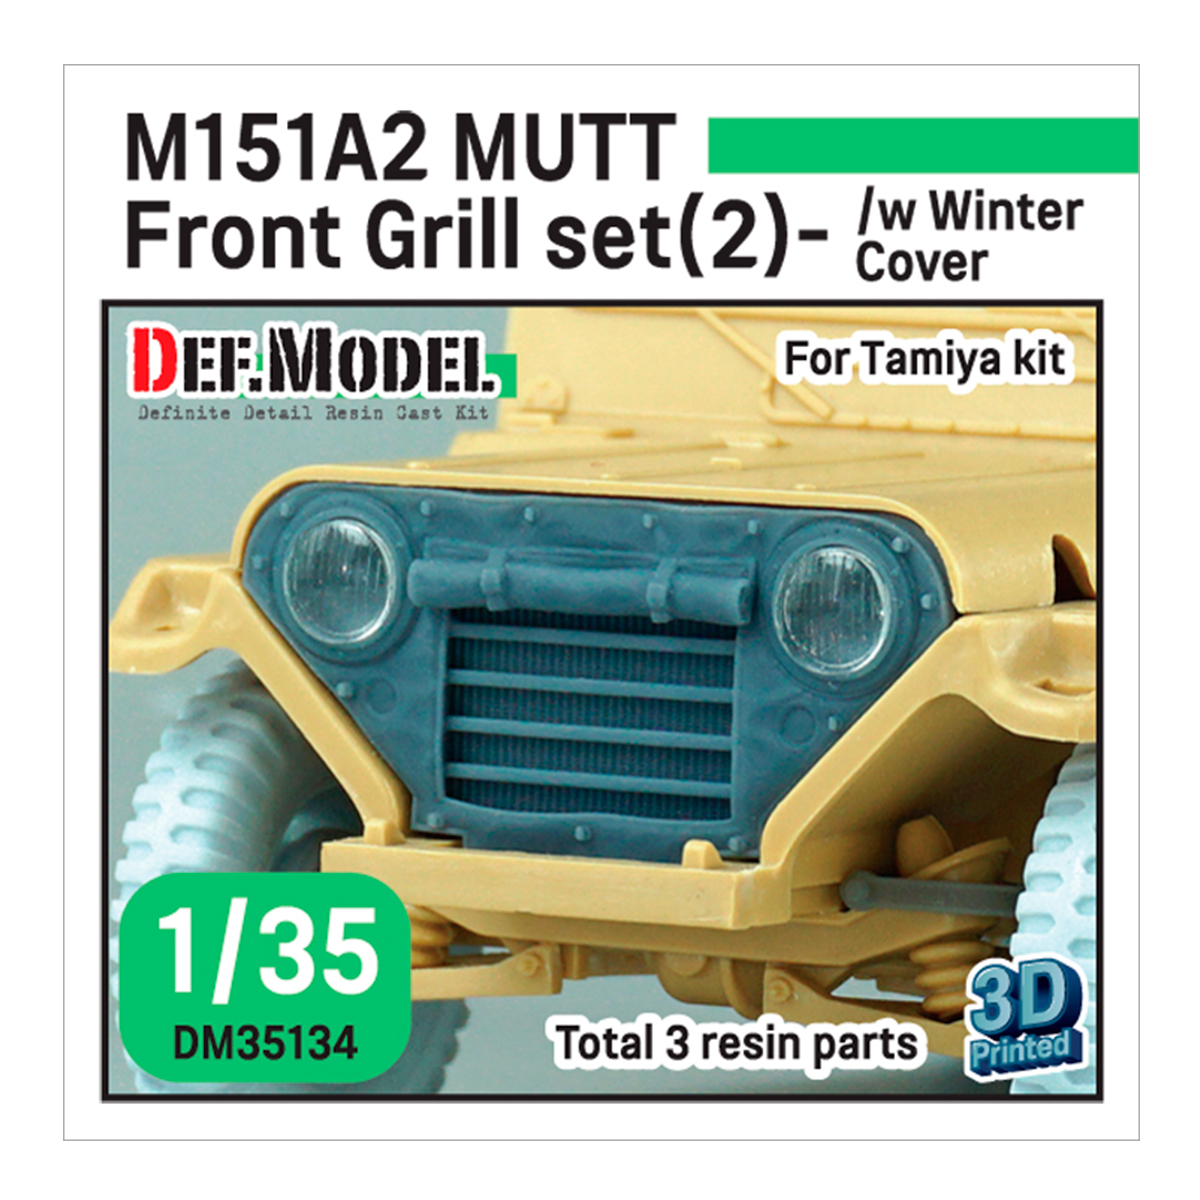 Modern US M151A2 Mutt front grill set (2)- Winter covered (for 1/35 Tamiya kit)